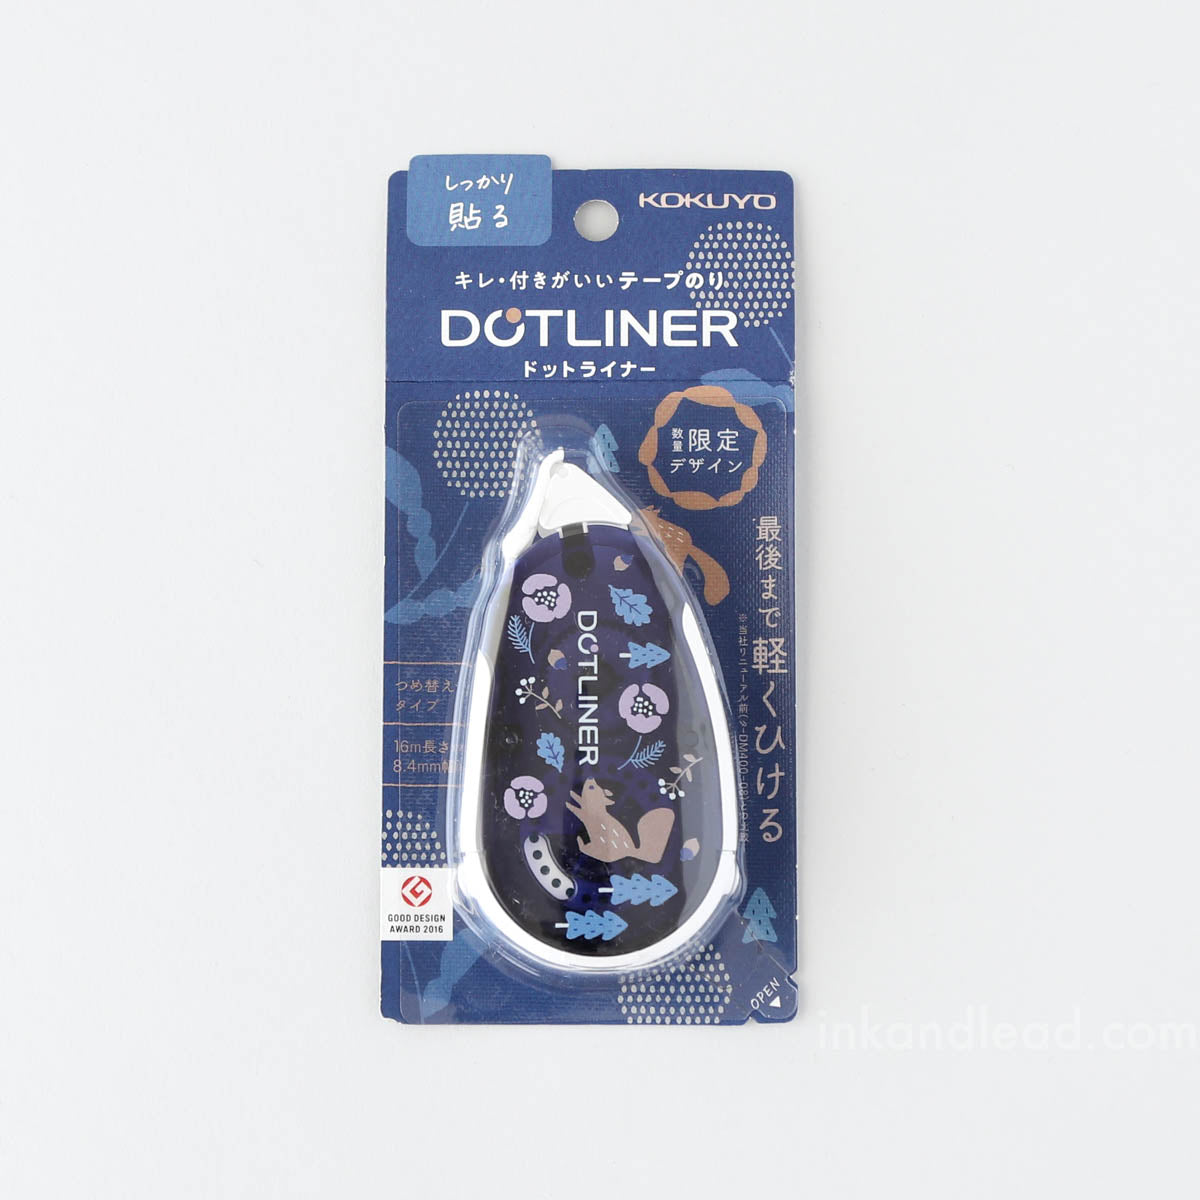 Dotliner Tape Glue - Re-Pasteable and Dust-Free - Perfect for